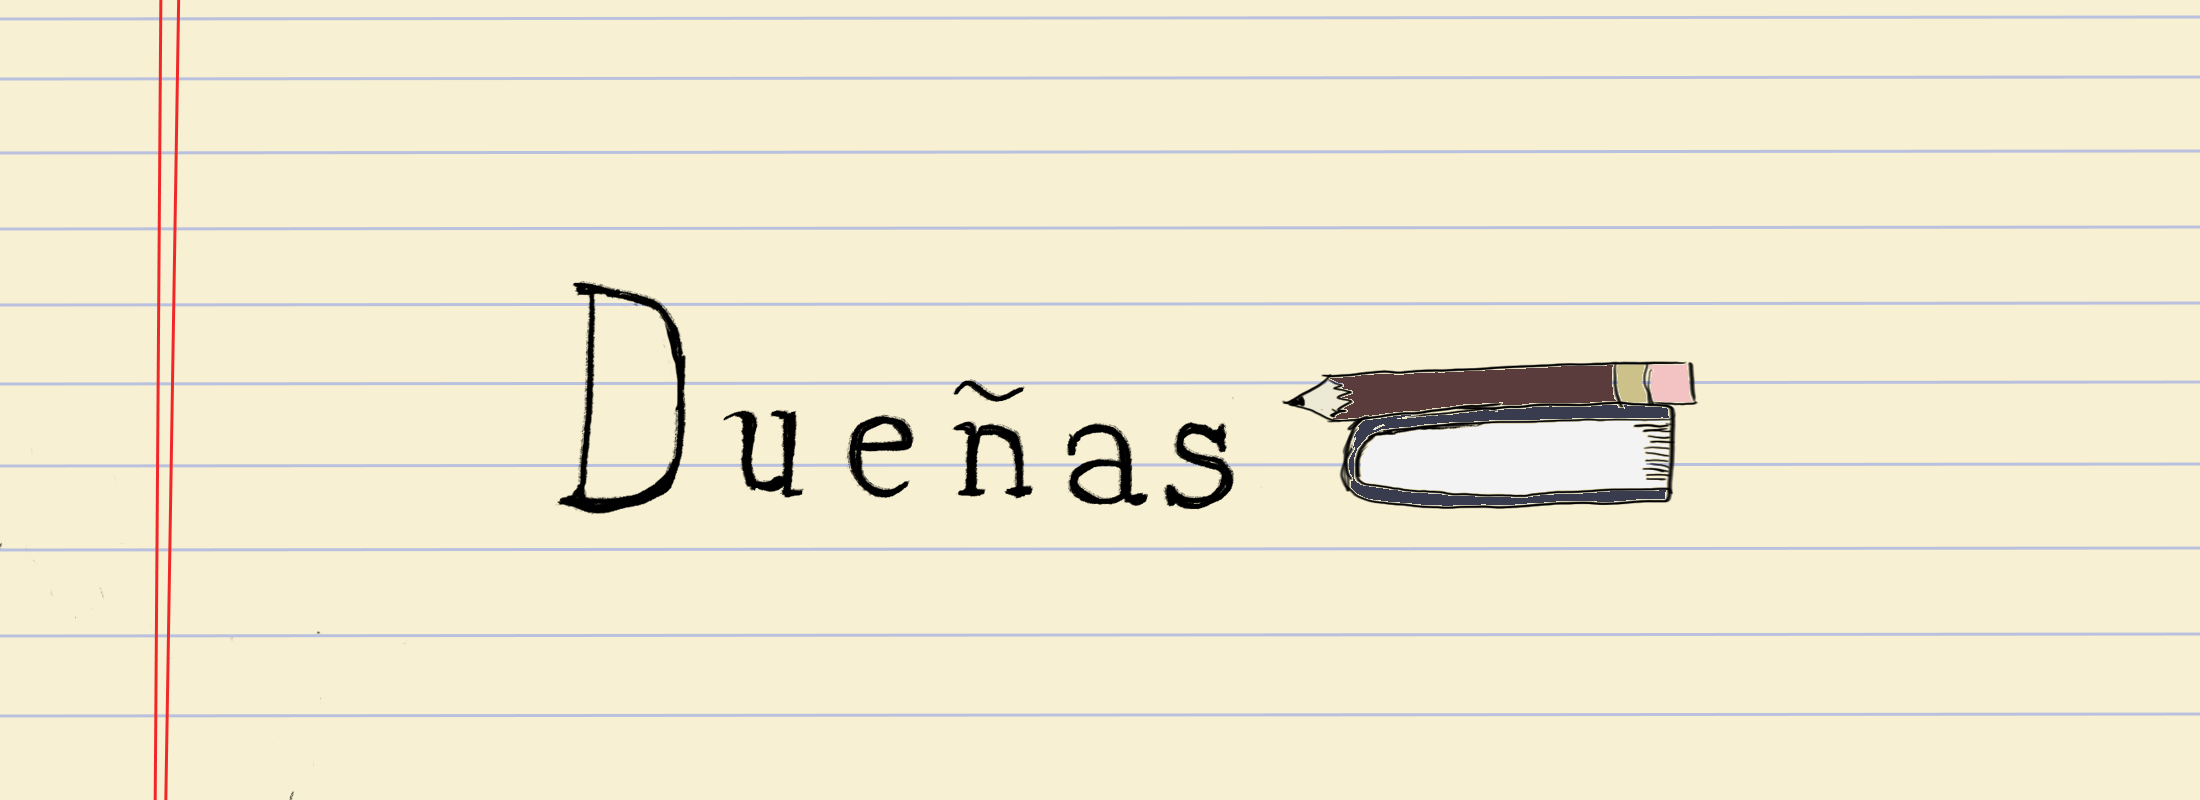 A name tag displaying the name Duenas on notebook paper.